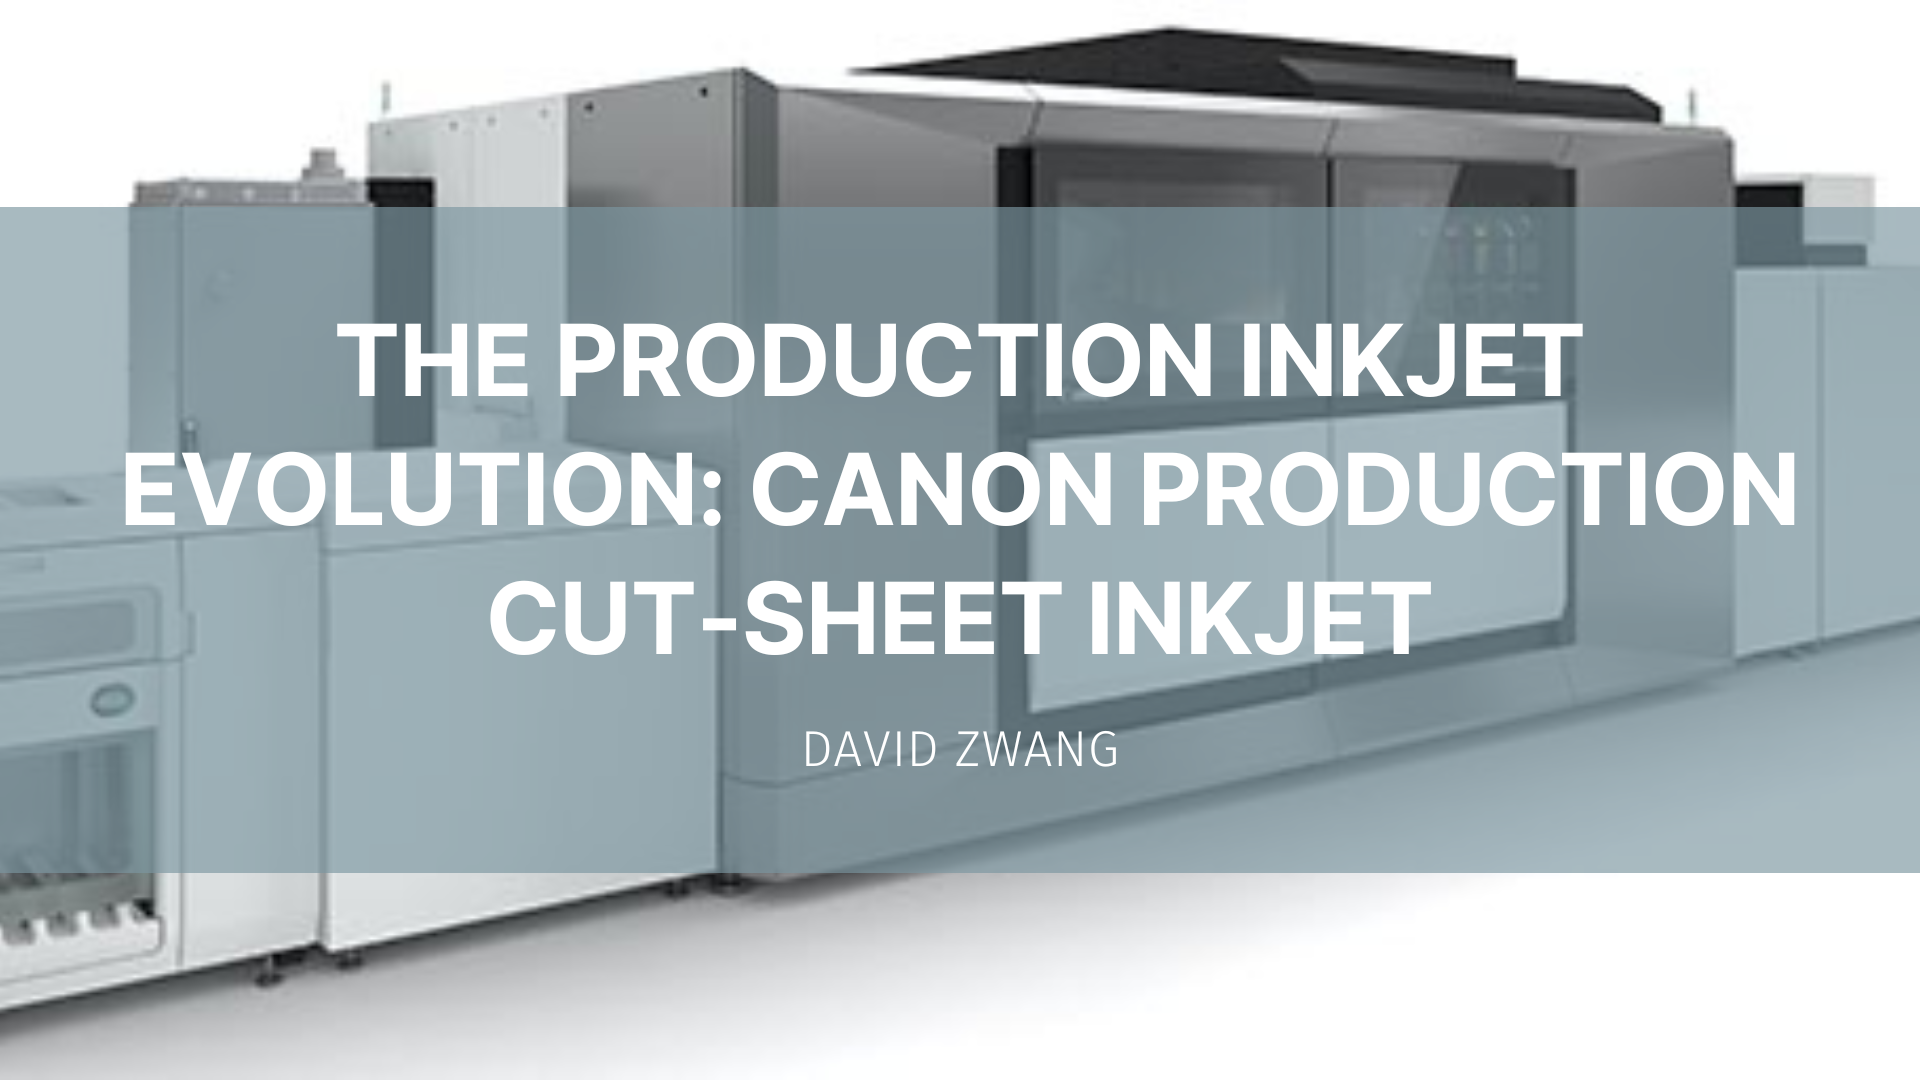 Featured image for “The Production Inkjet Evolution: Canon Production Cut-Sheet Inkjet”